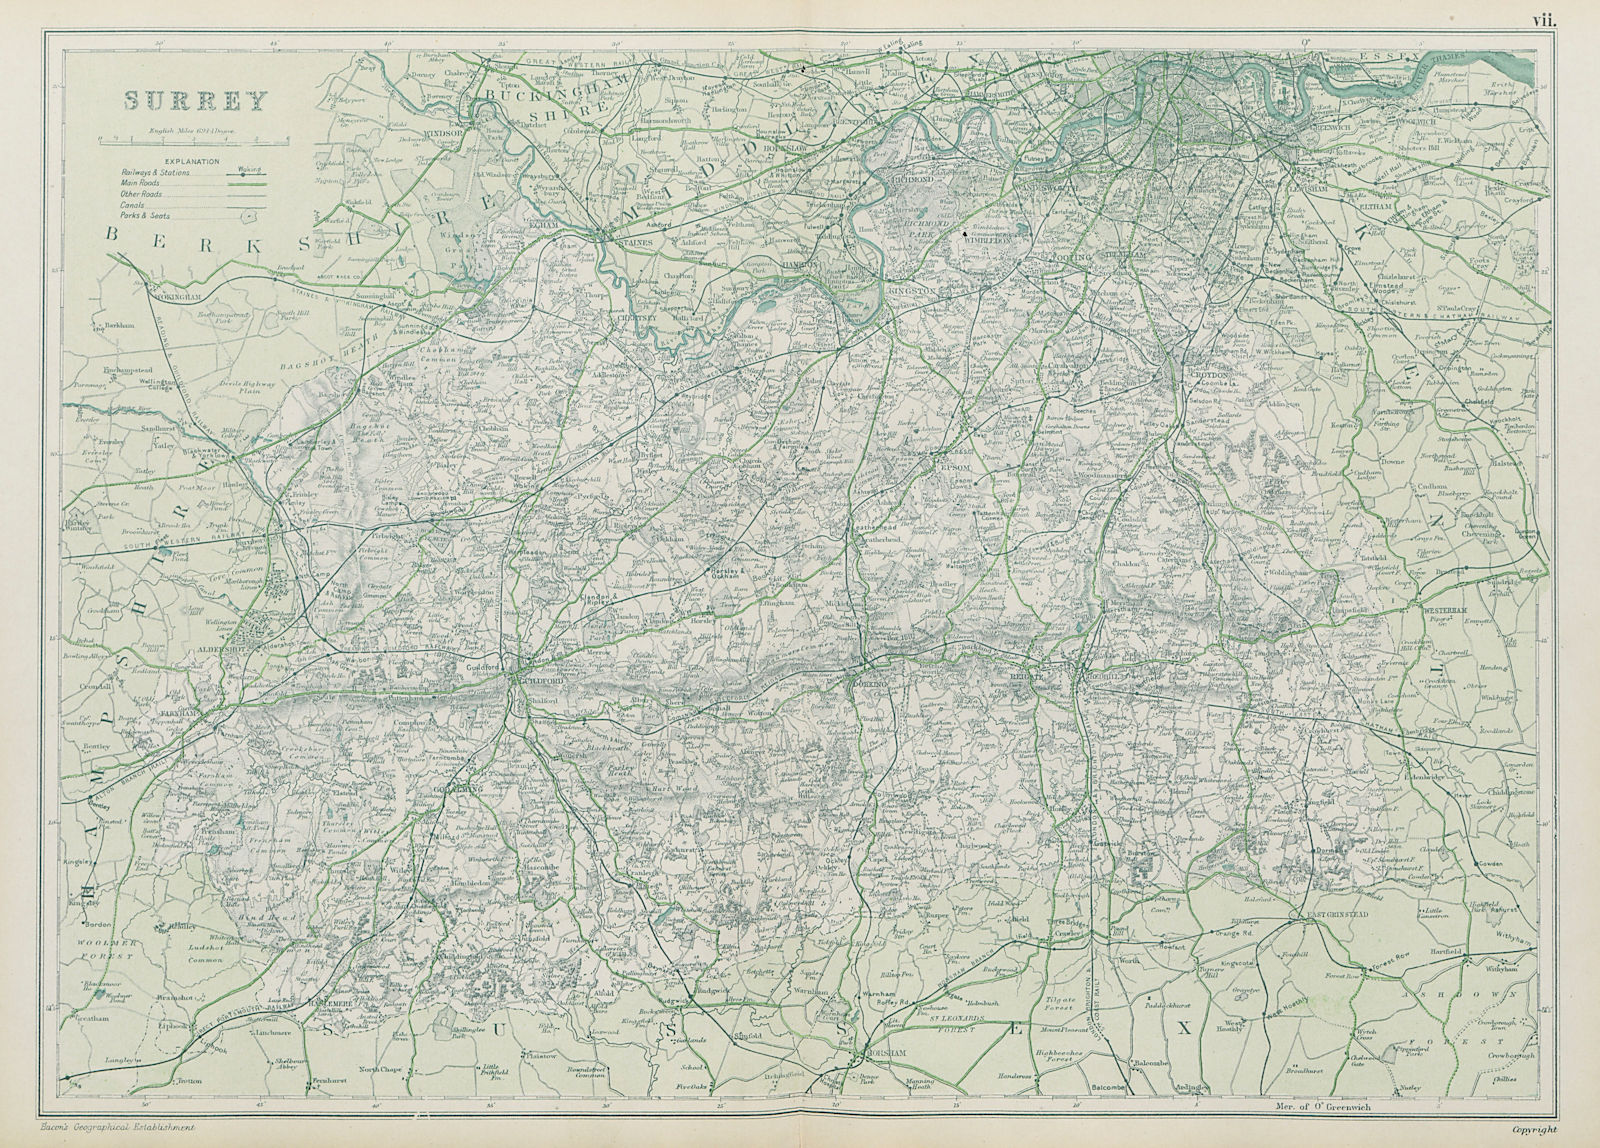 Associate Product SURREY. Showing Parliamentary divisions, boroughs & parks. BACON 1913 old map